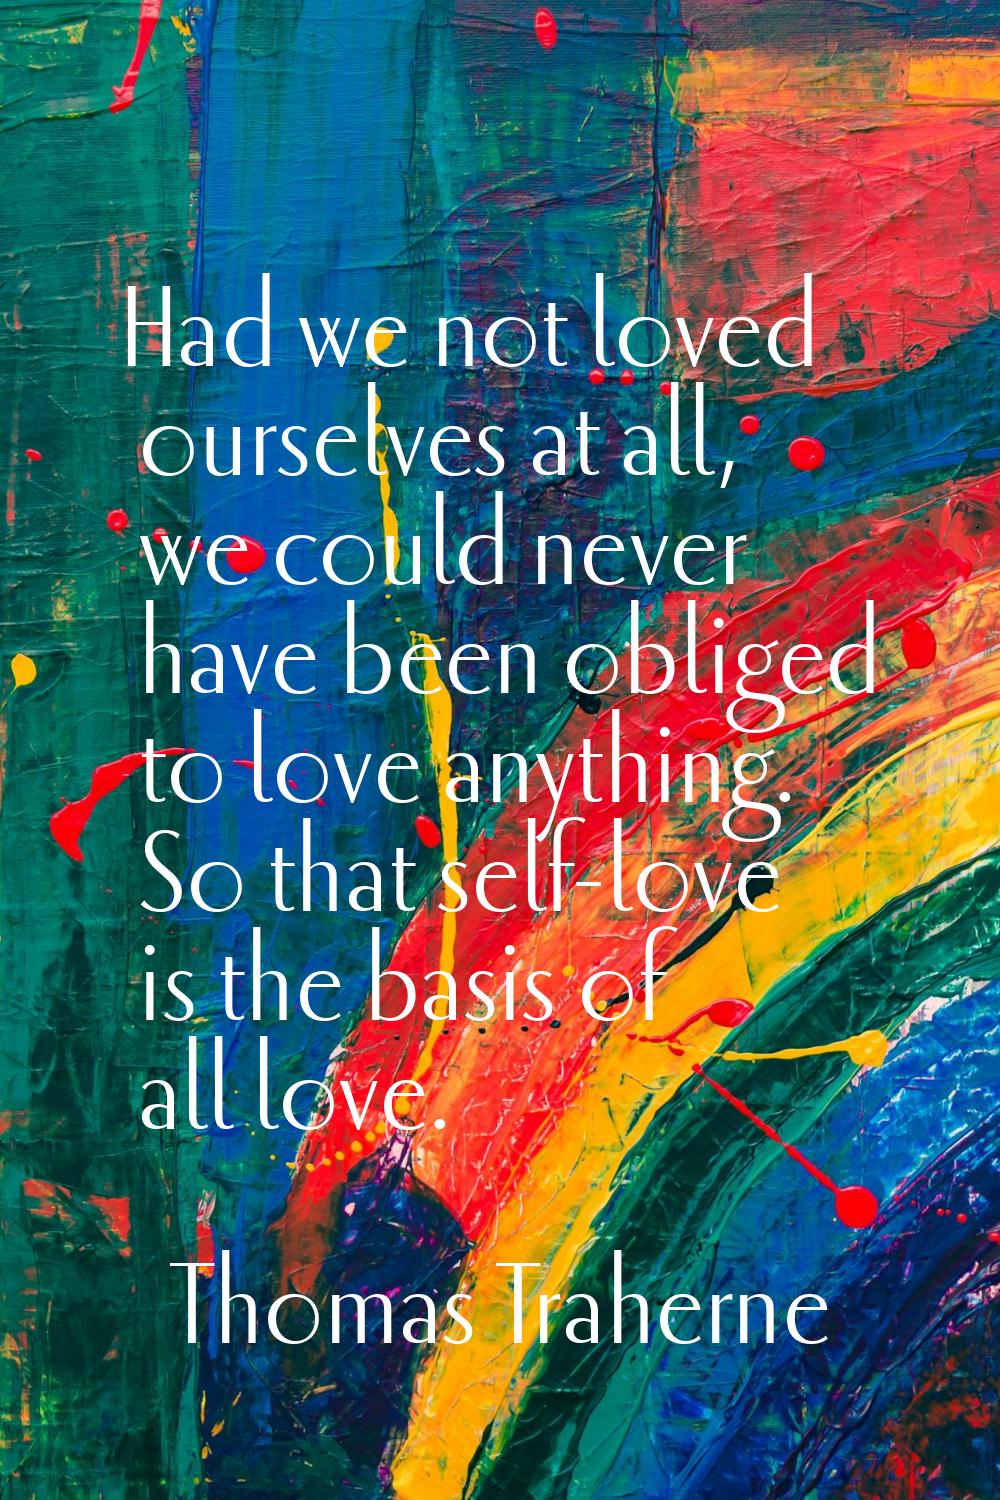 Had we not loved ourselves at all, we could never have been obliged to love anything. So that self-